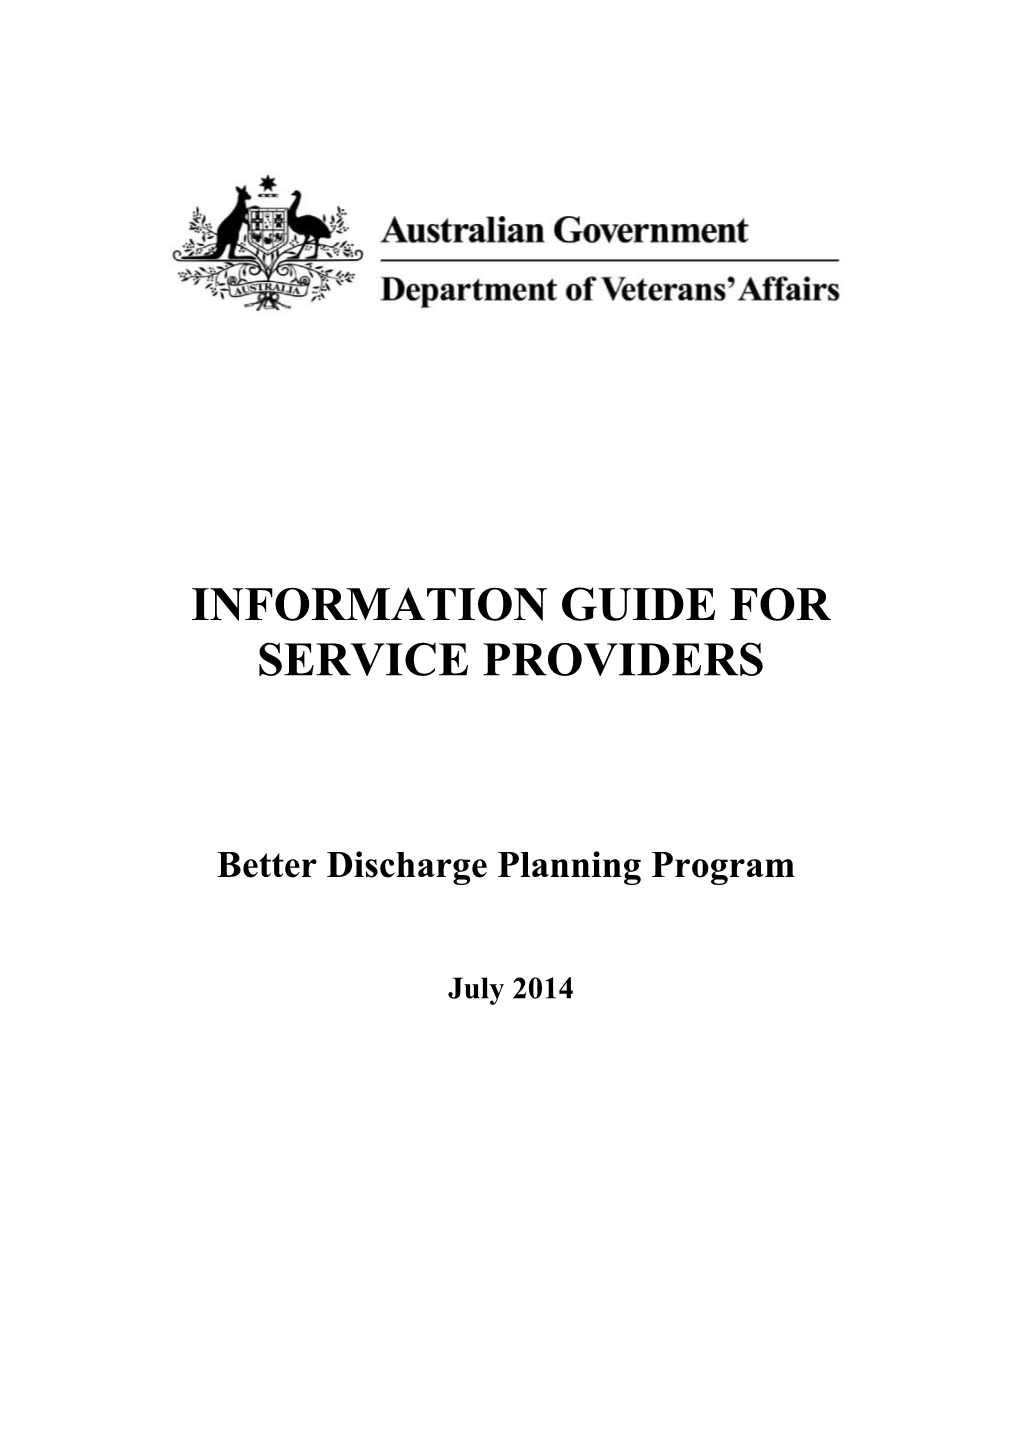 Information Guide for Service Providers